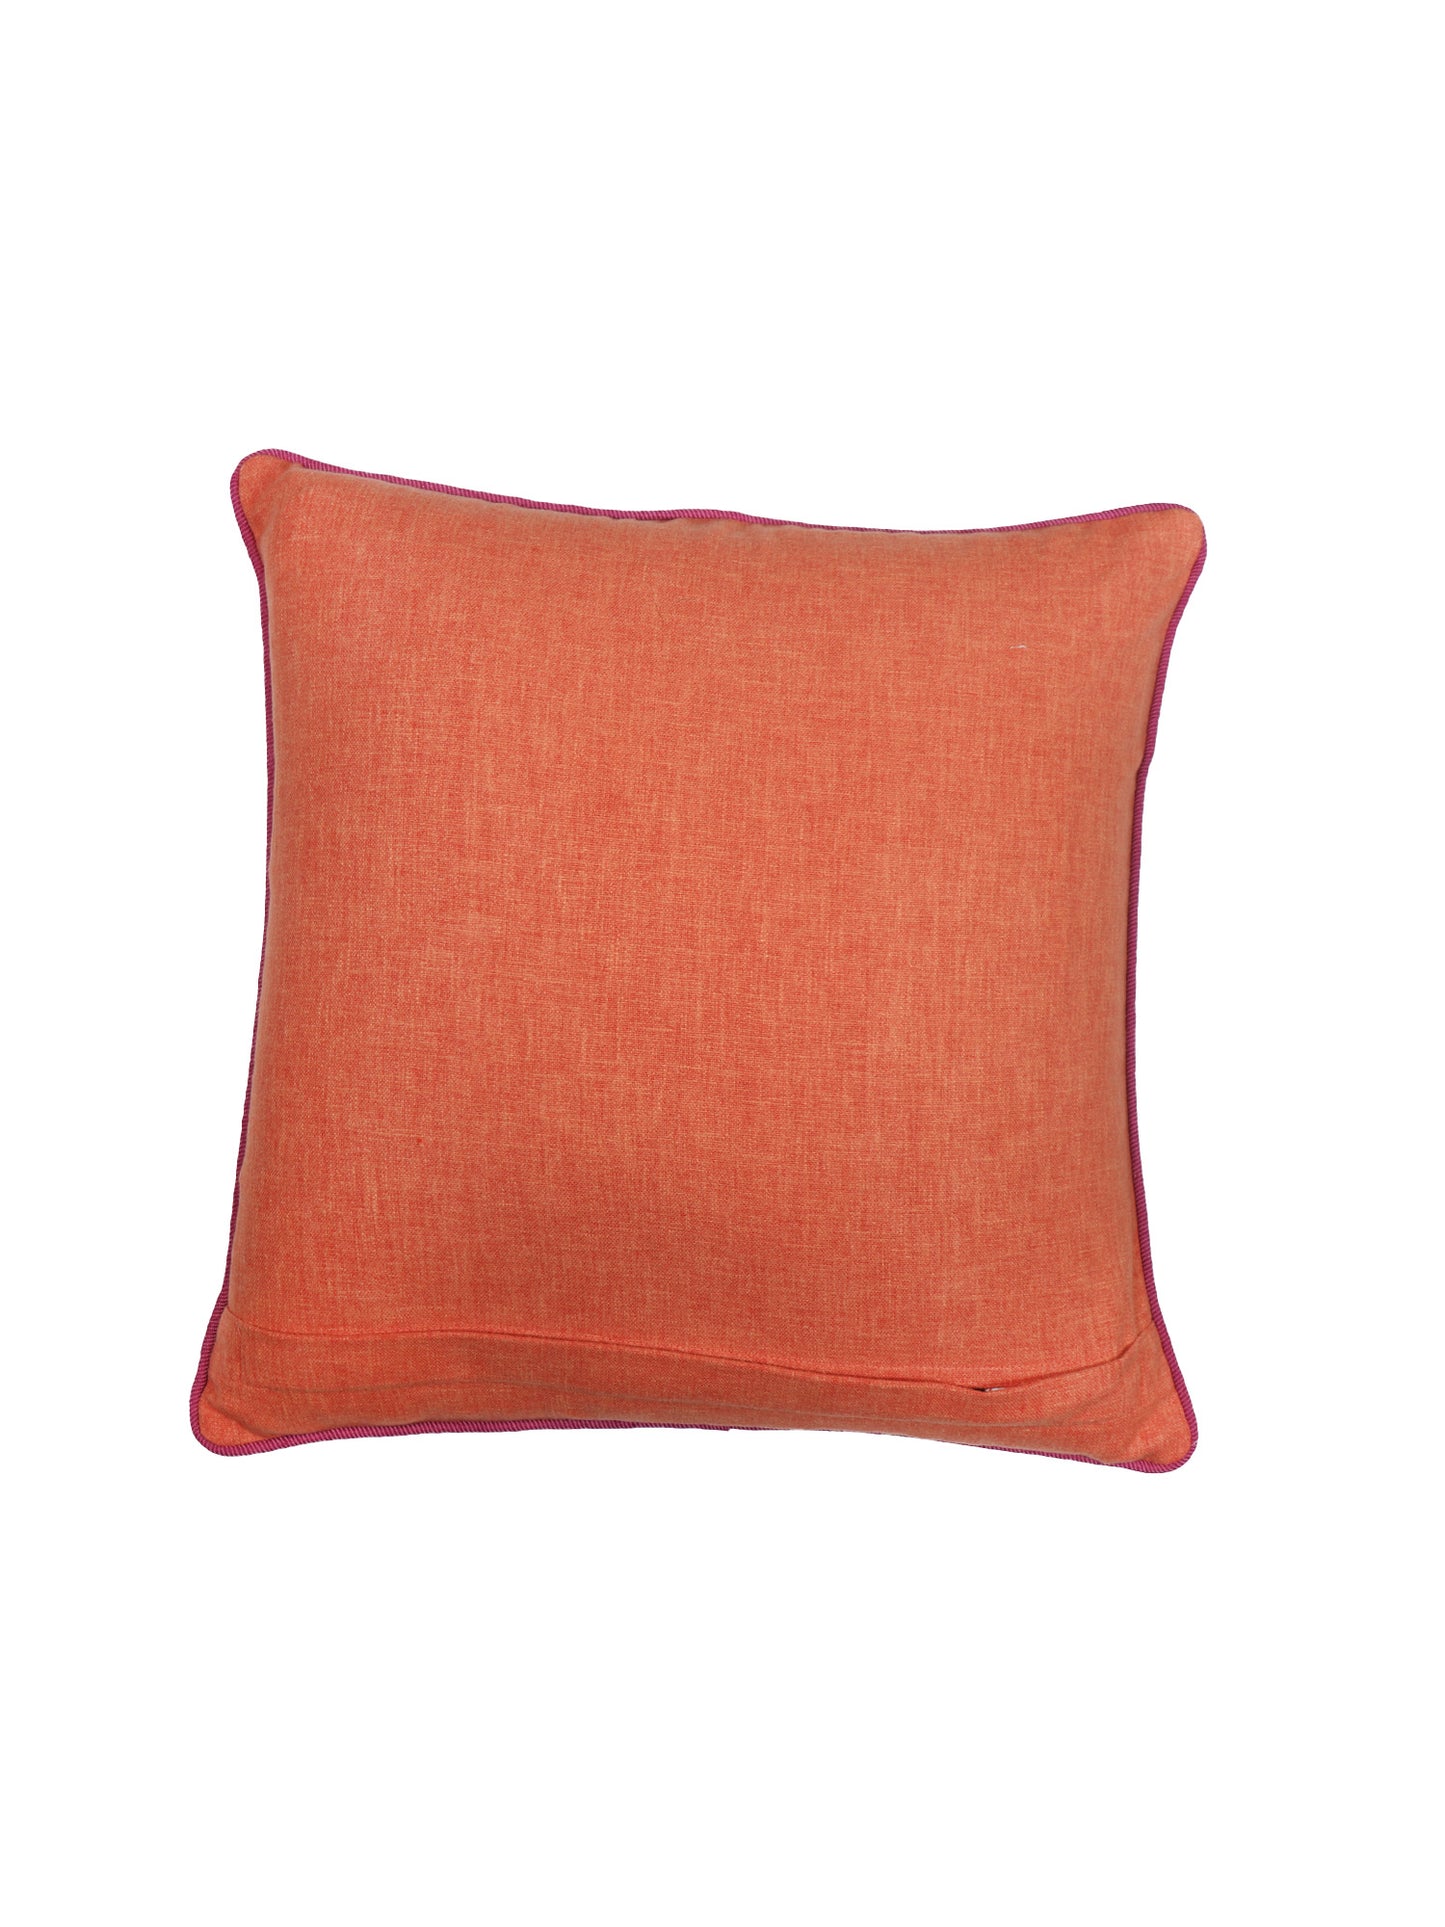 Cushion Cover with Modern Ikat Print with Hand Embroidery and Cord Piping - Polycanvas | Orange - 16x16in